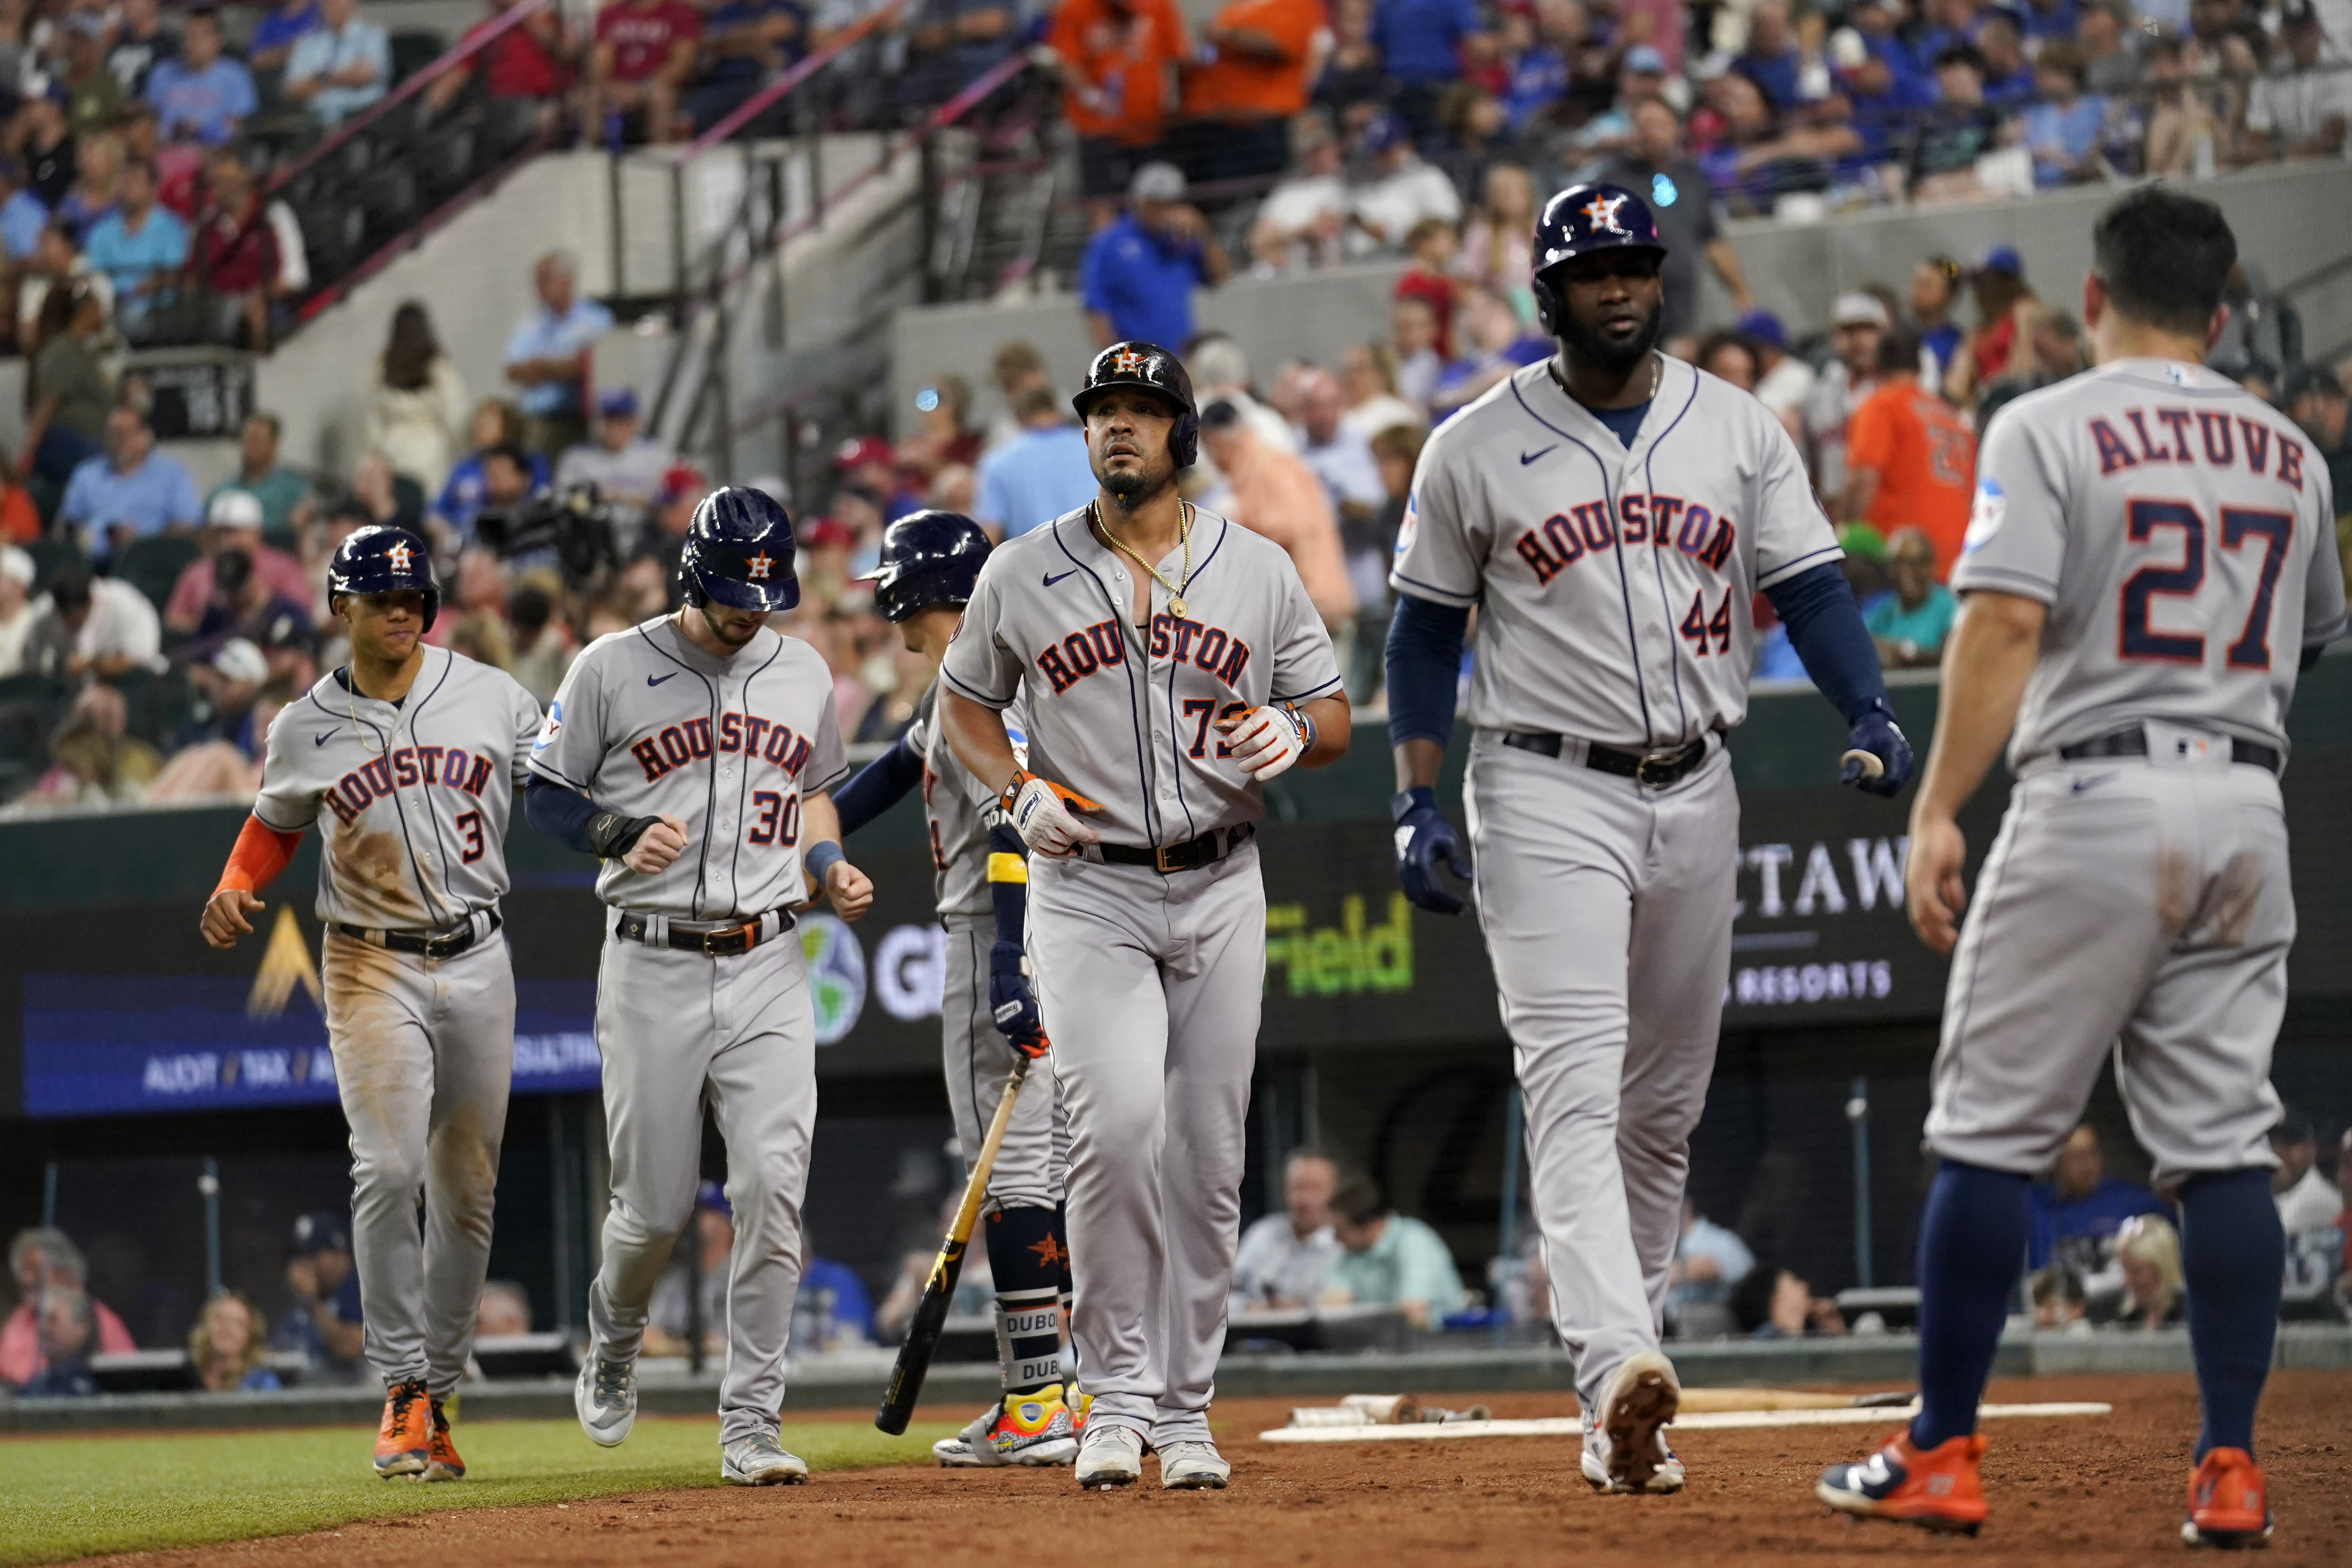 Astros complete sweep with 12-3 win over Rangers